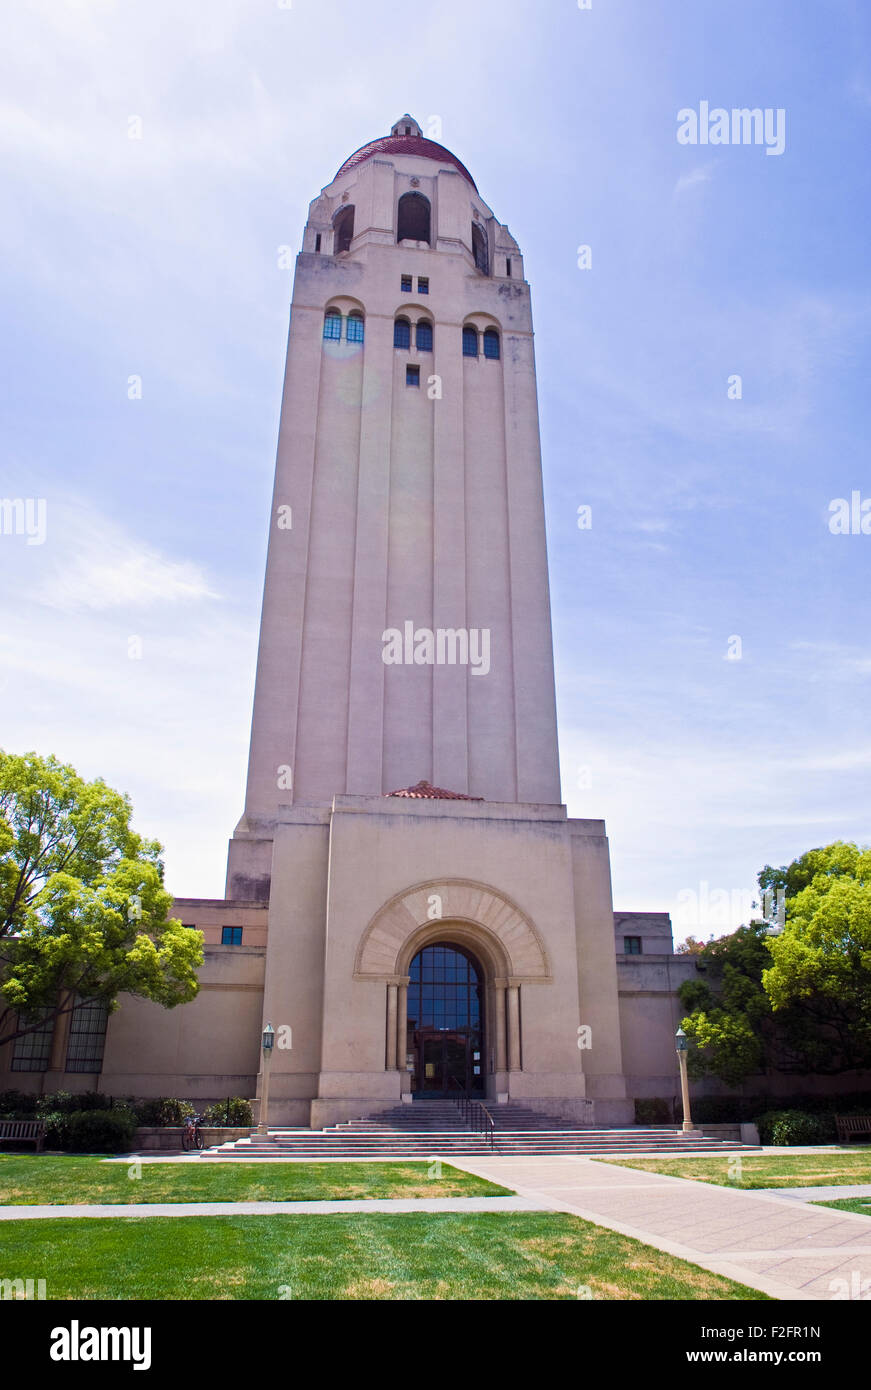 The Hoover Tower at Stanford University on a sunny day Stock Photo